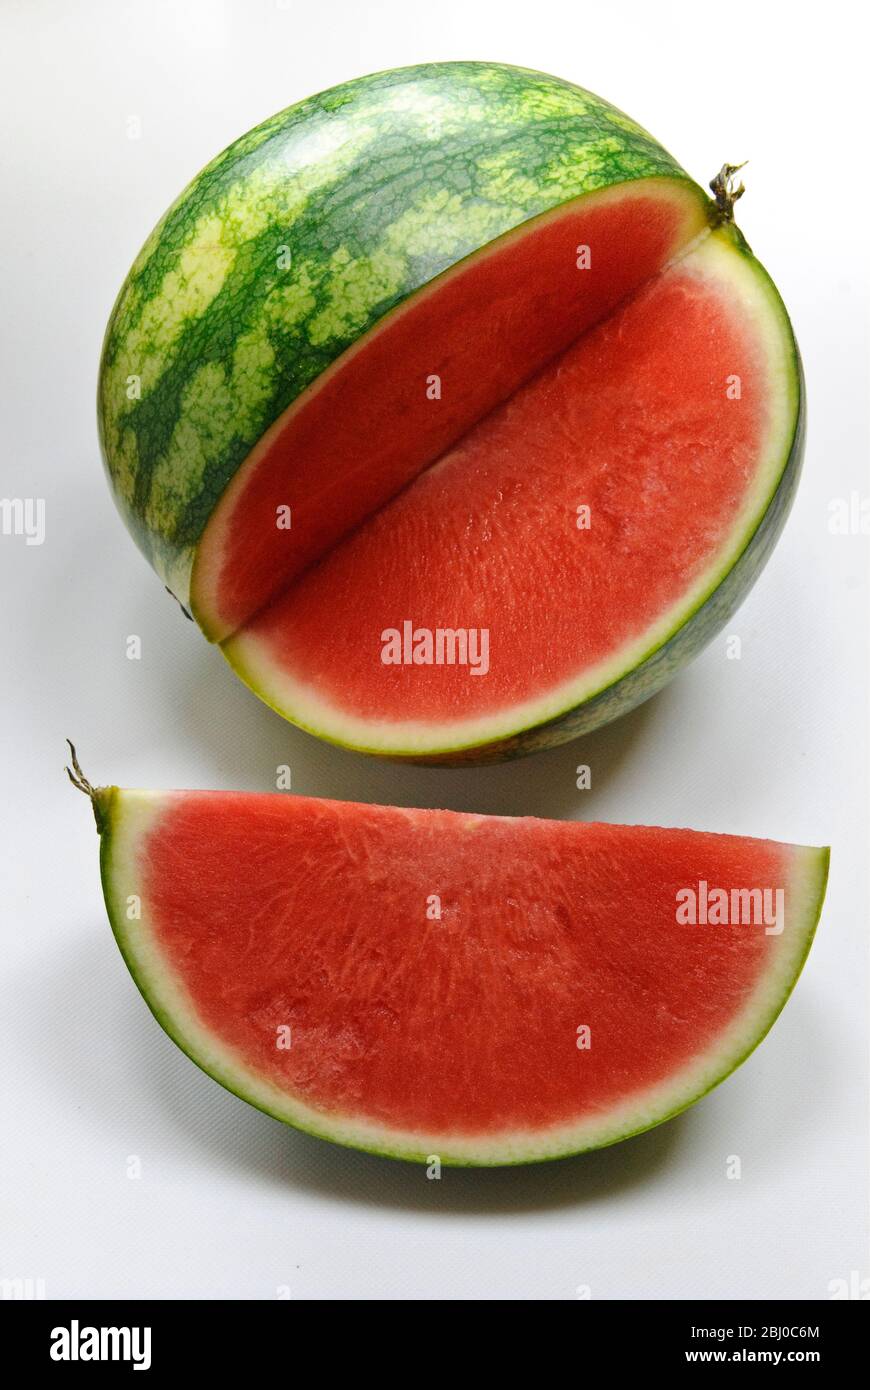 Small watermelon on white surface with quarter cut out showing red flesh - Stock Photo